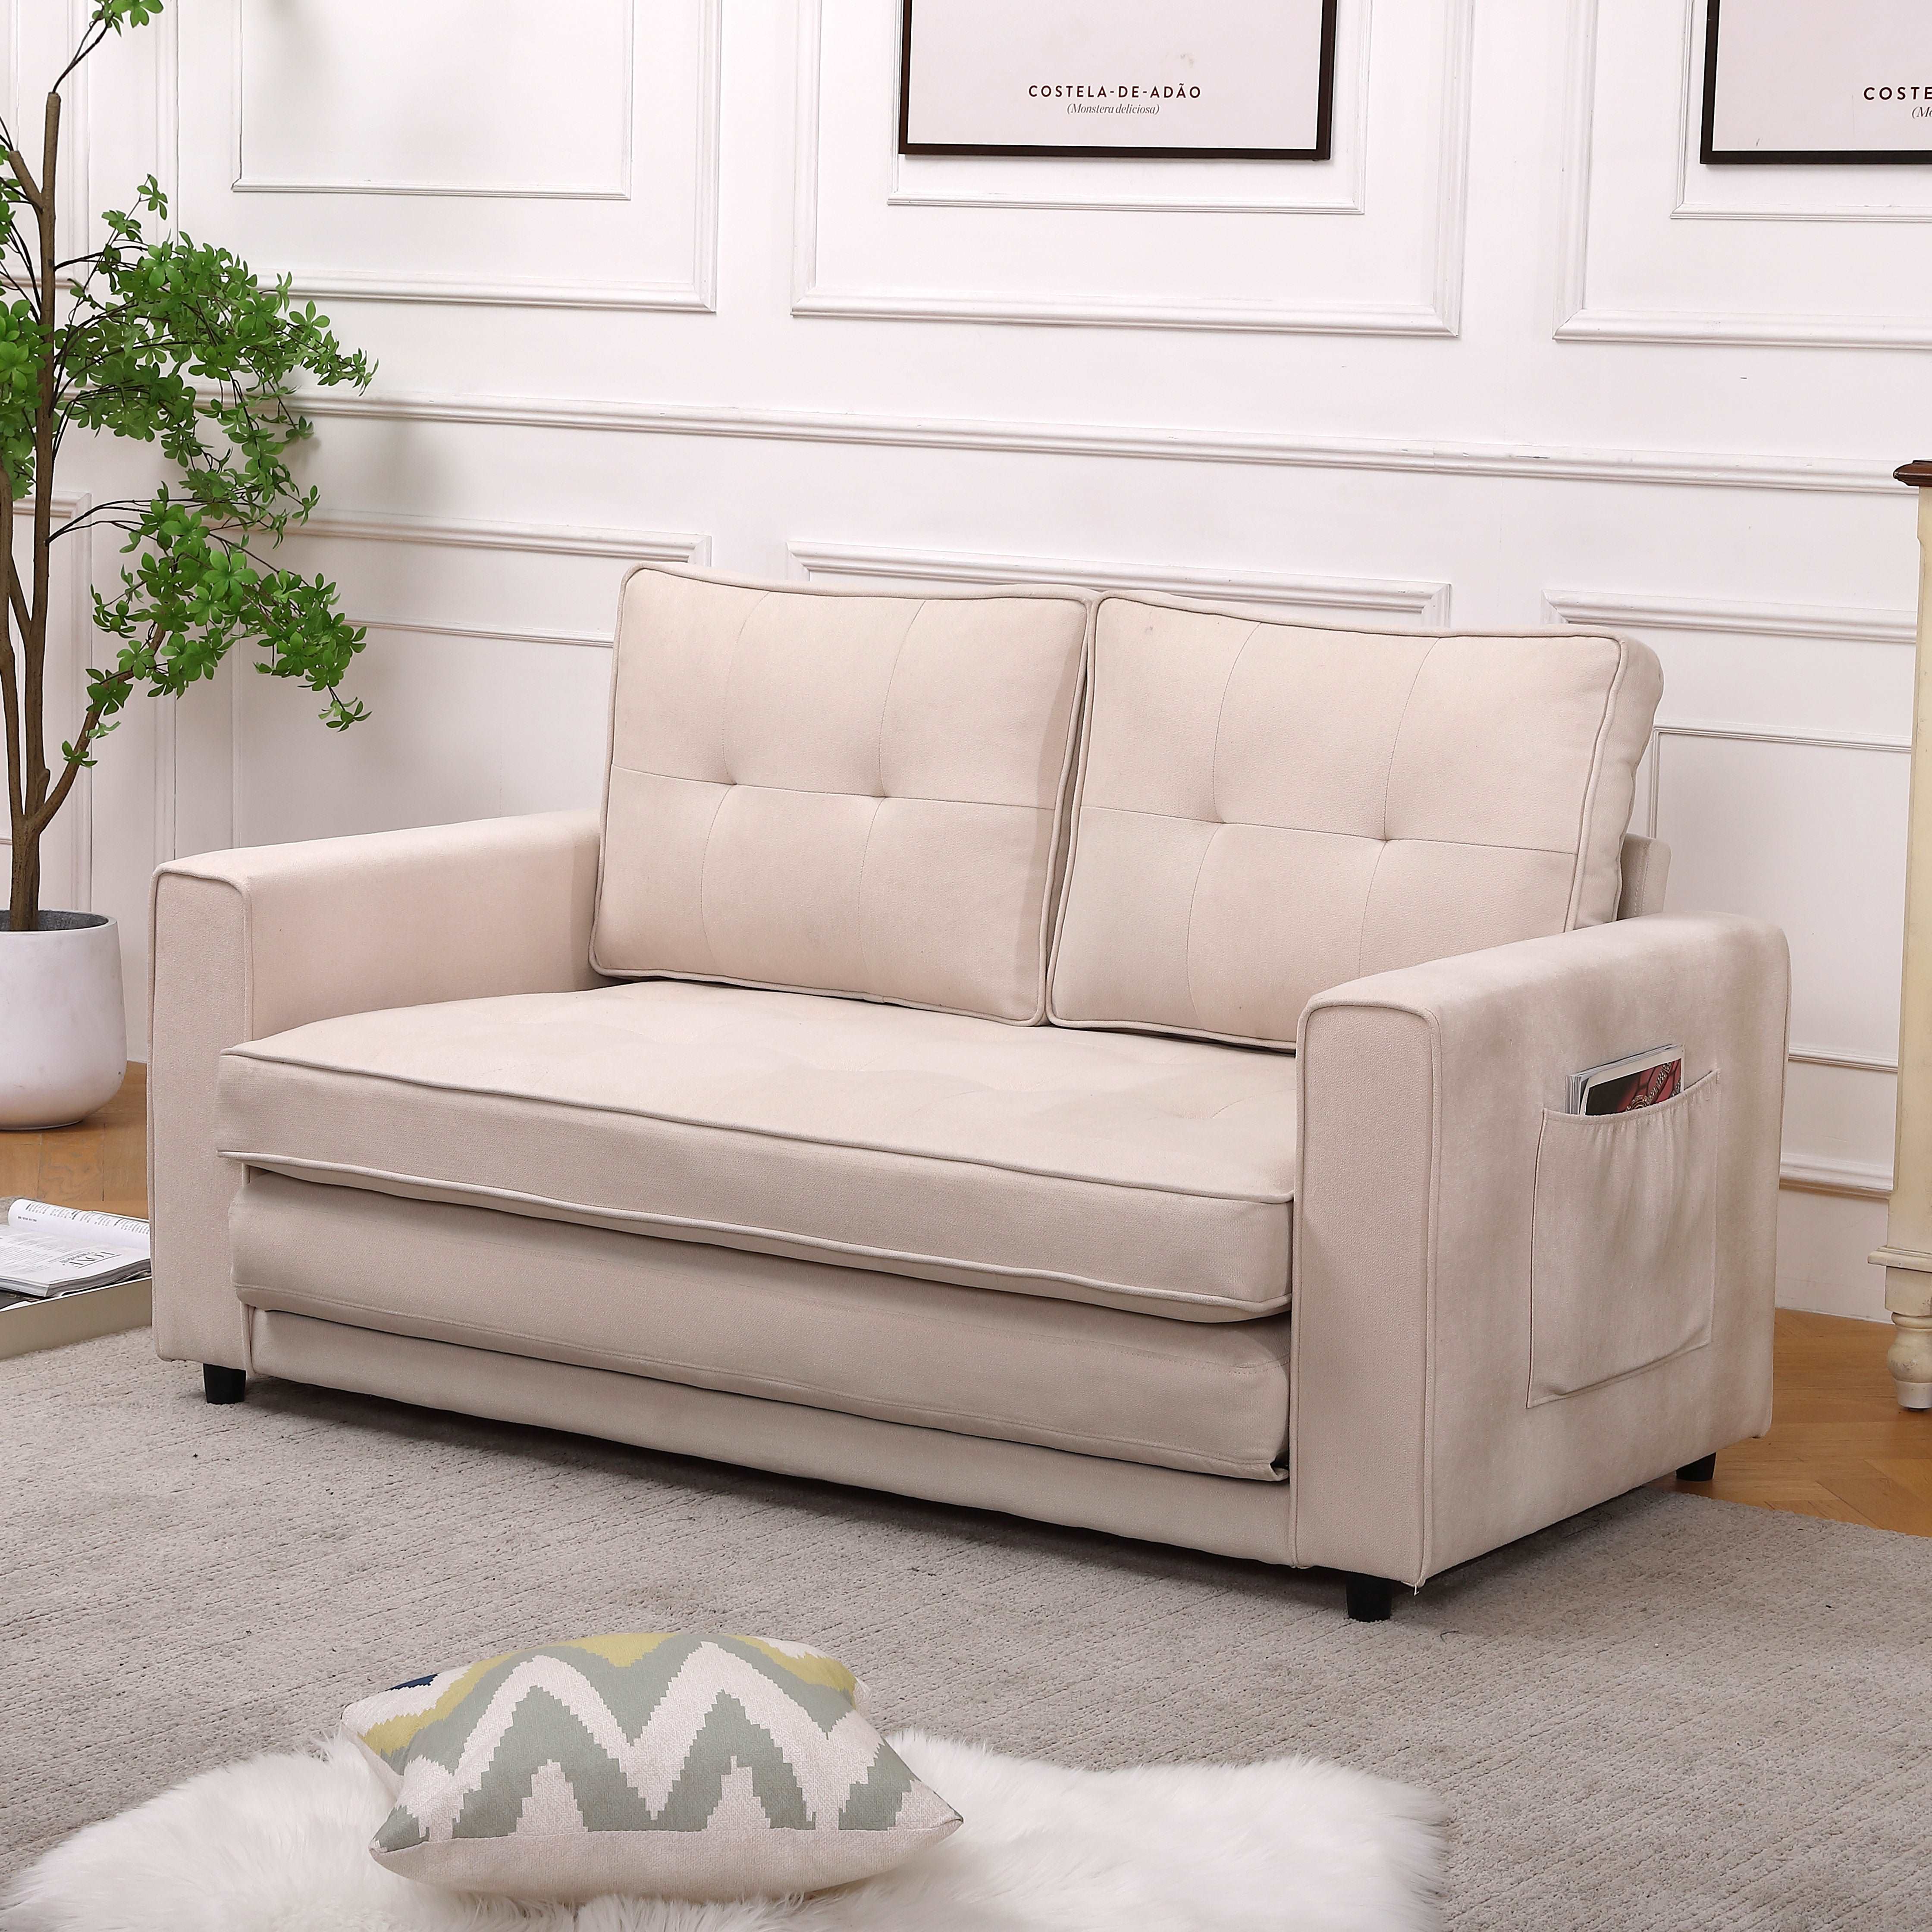 Bellemave 3-in-1 Upholstered Futon Sofa Convertible Floor Sofa bed,Foldable Tufted Loveseat